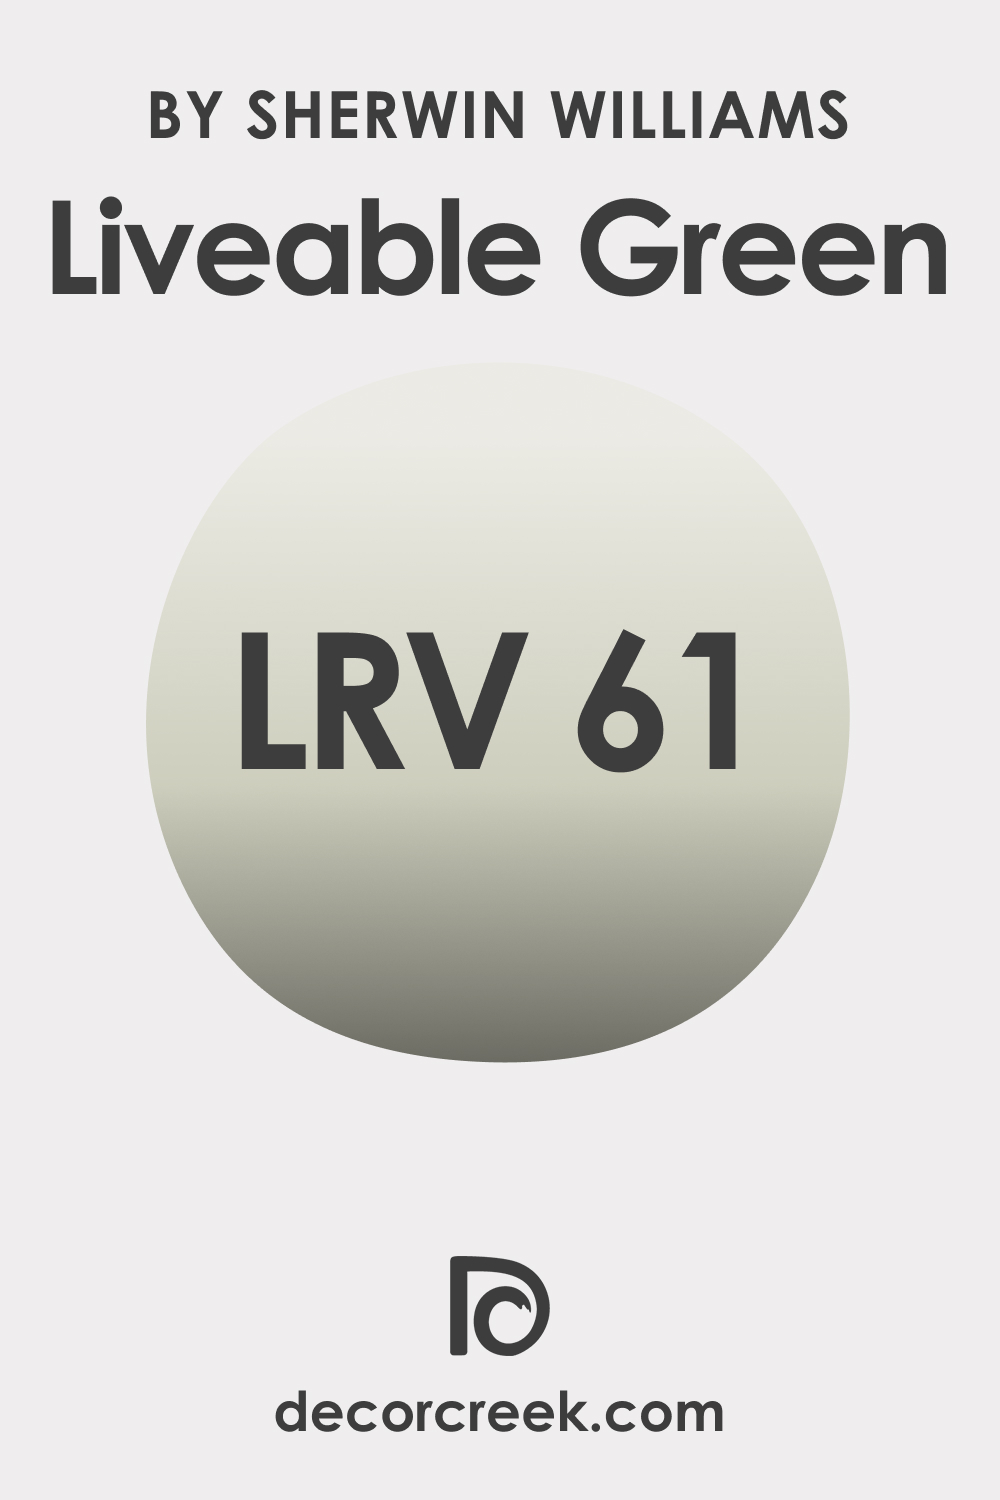 What LRV Does Liveable Green SW 6176 Have?